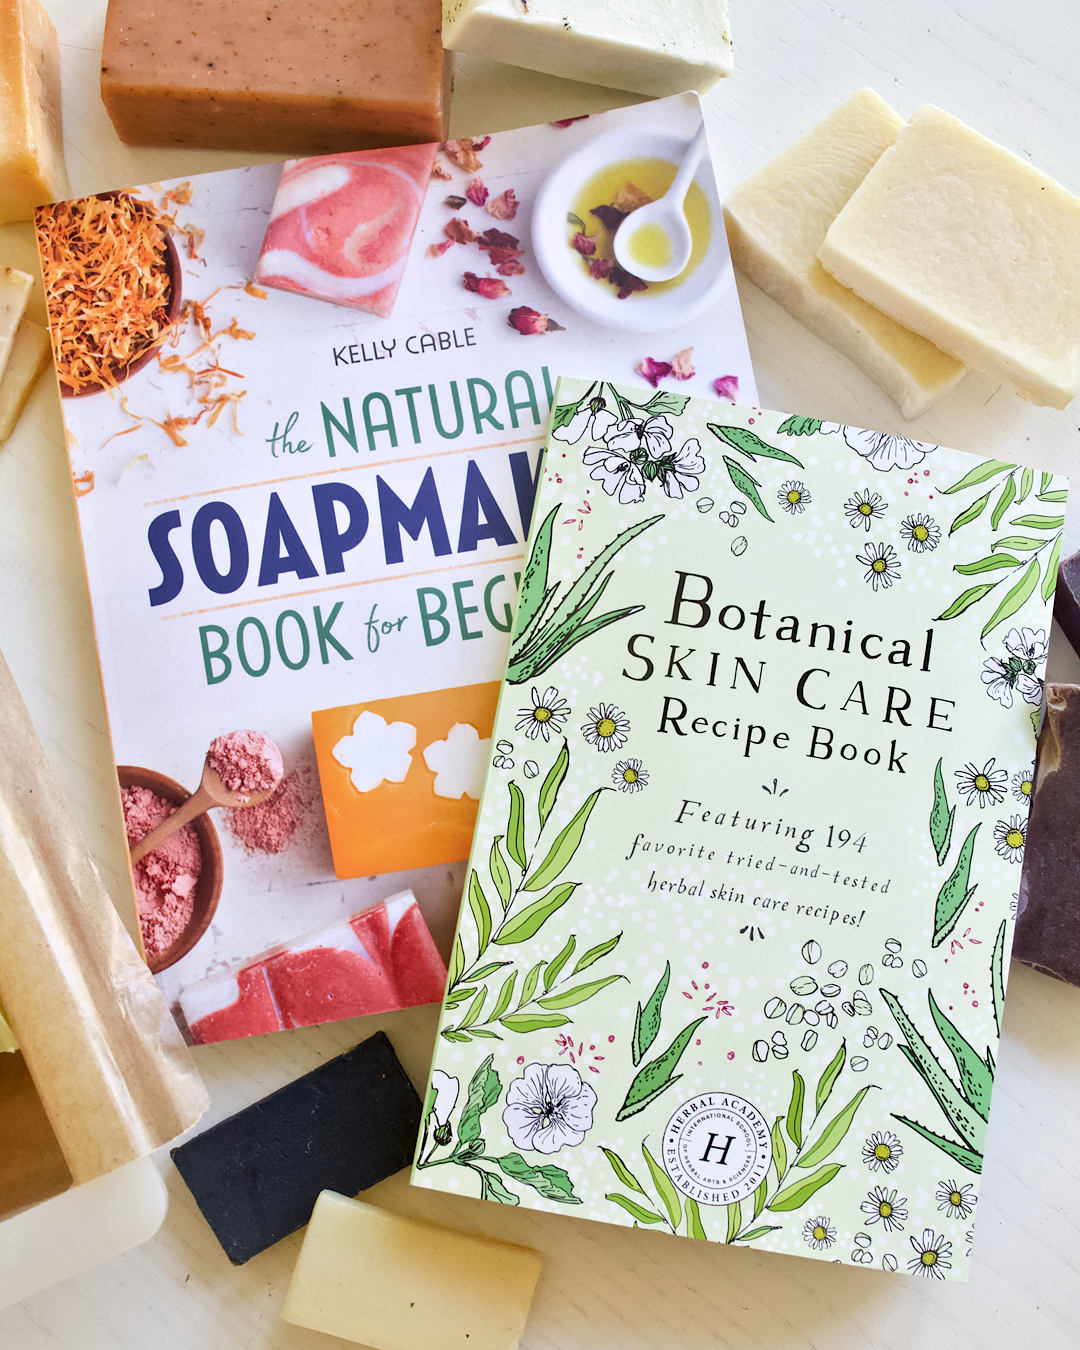 Botanical Skin Care Course And Recipe Book Giveaway Herbal Academy